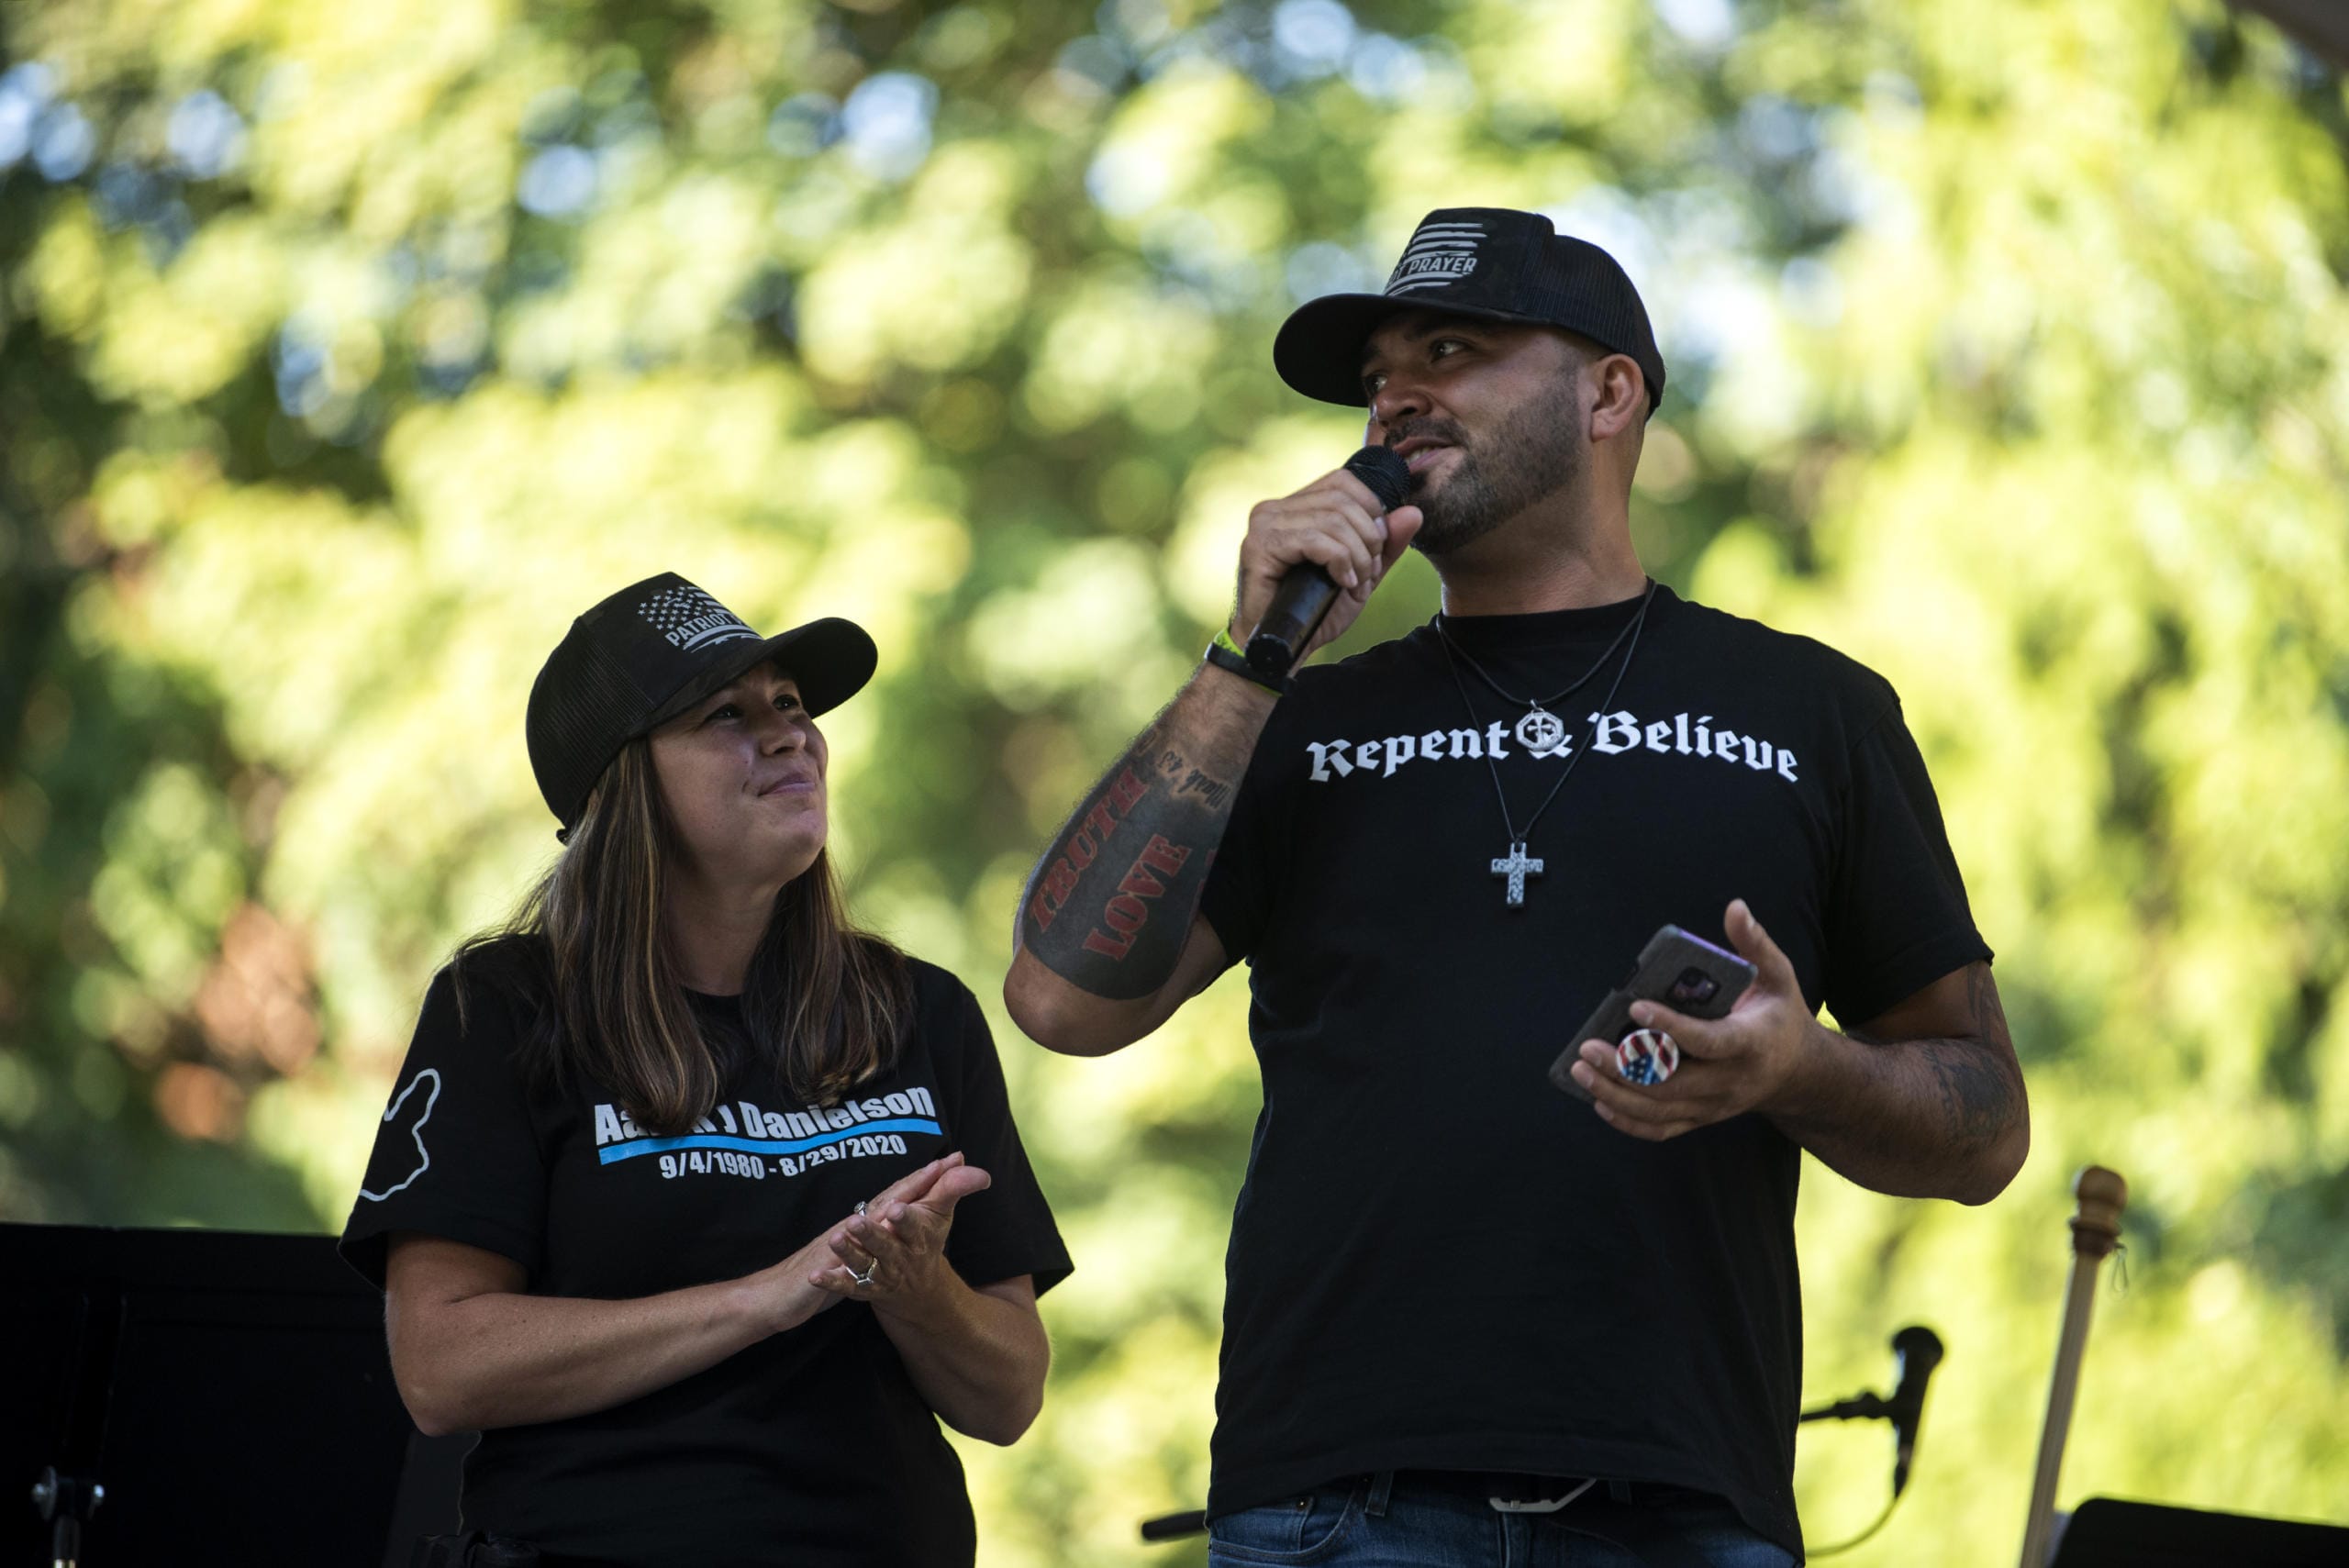 Michelle Dawson of Battle Ground, left, and Patriot Prayer leader Joey Gibson speak during the memorial to remember Aaron "Jay" Danielson who was fatally shot after a pro-Trump rally in Portland last month, at Esther Short Park in Vancouver on September 5, 2020.